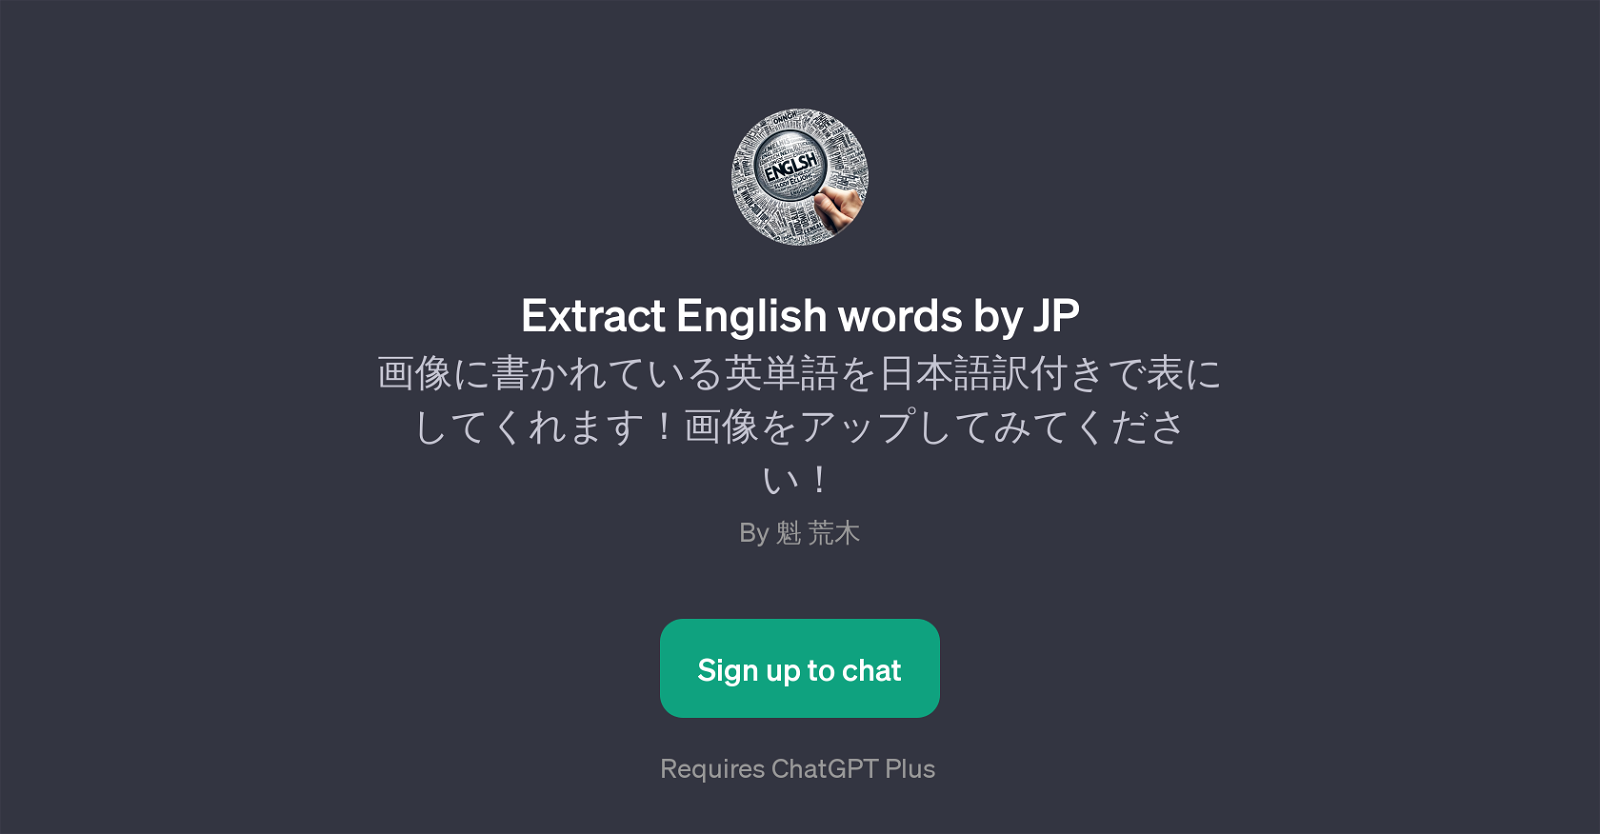 Extract English words by JP website